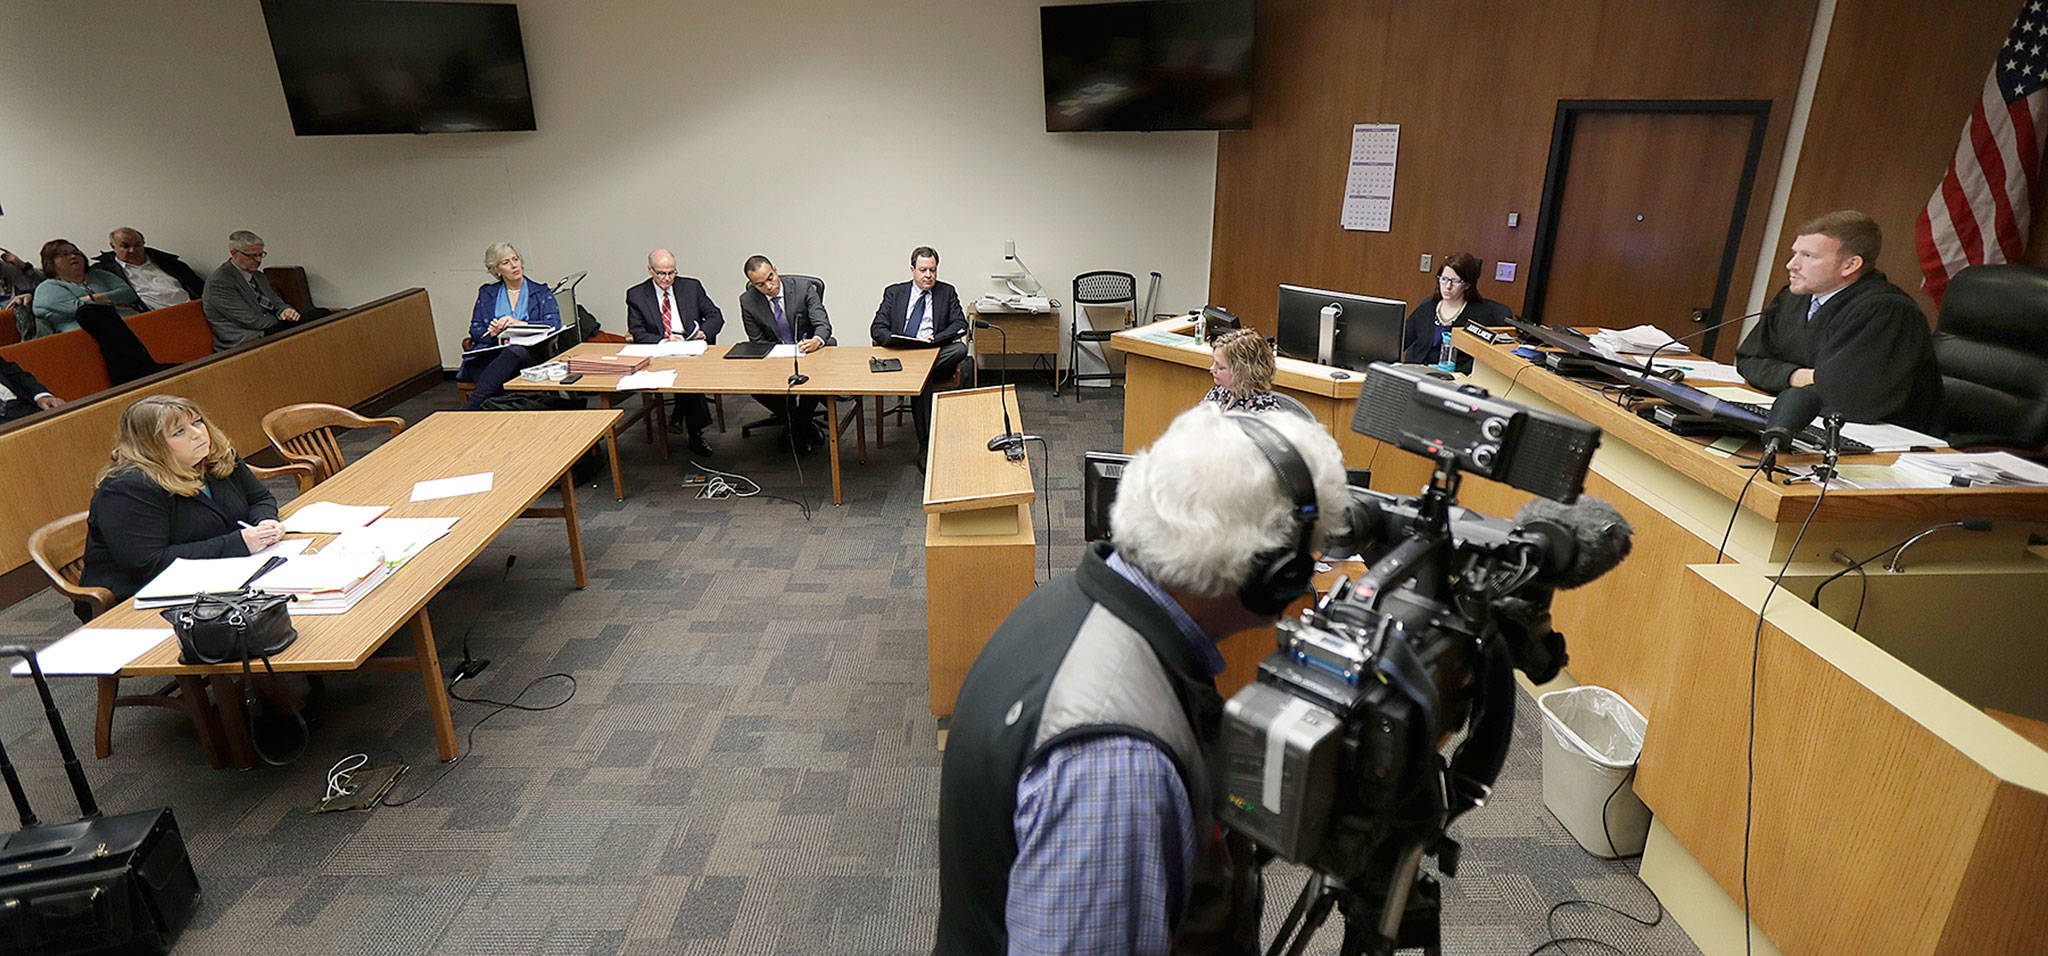 Thurston County Superior Court Judge Chris Lanese (right) speaks in court on Friday in Olympia. He ruled that the records of individual Washington state lawmakers are subject to public disclosure. (AP Photo/Ted S. Warren)